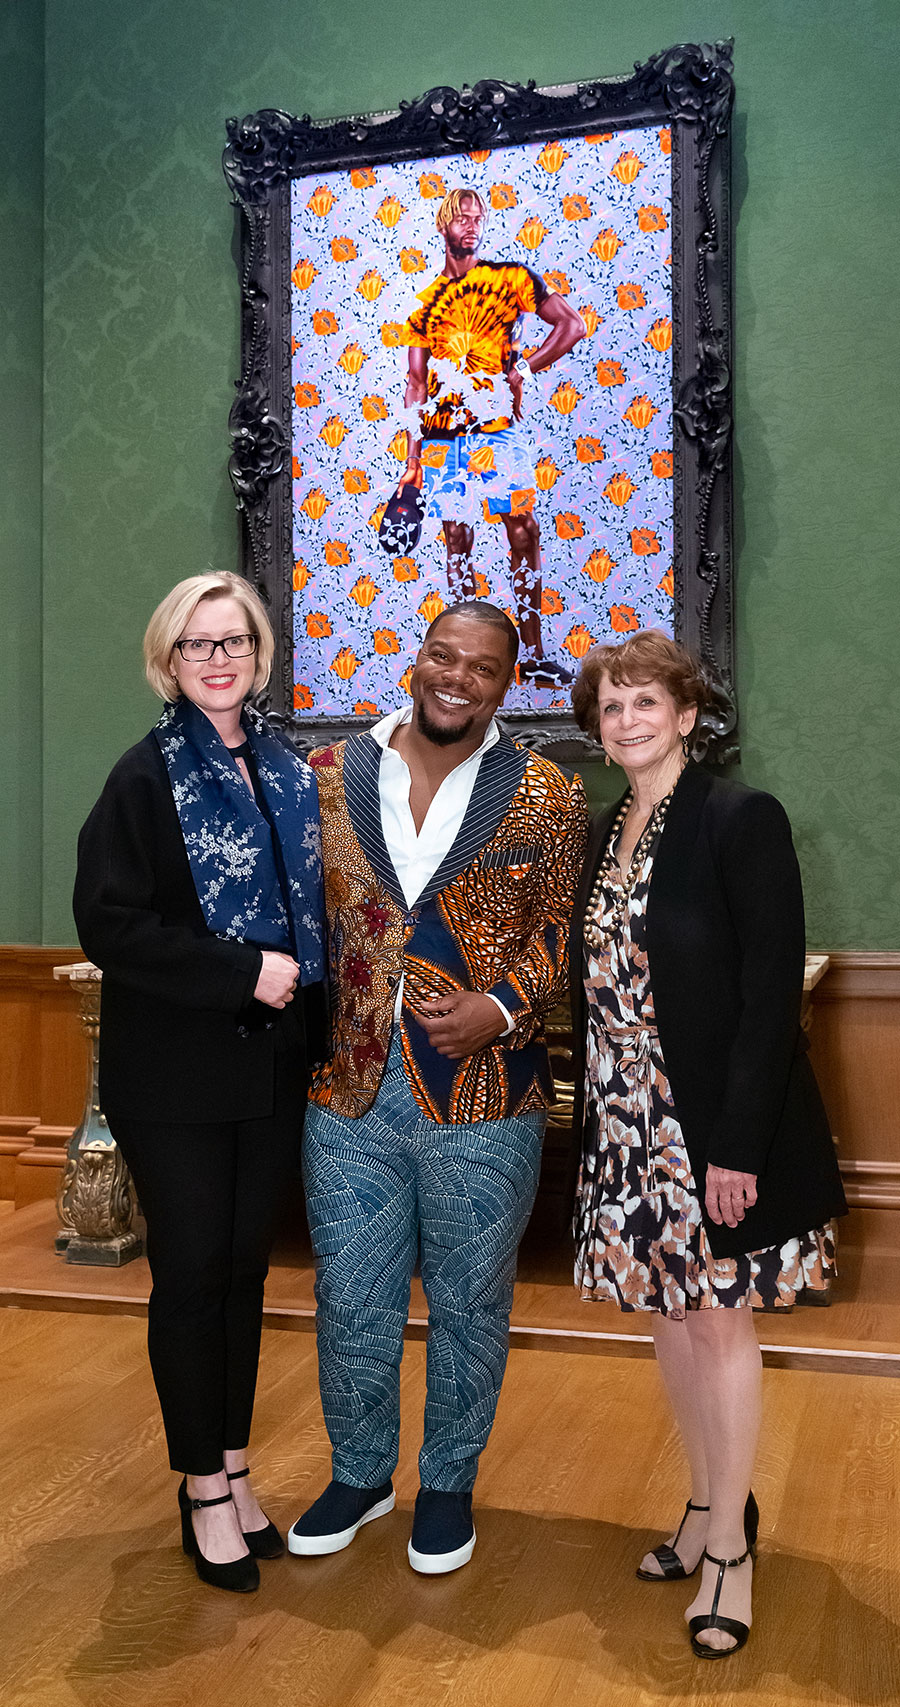 Three people inside an art gallery with the Kehinde Wiley painting A Portrait of a Young Gentleman.